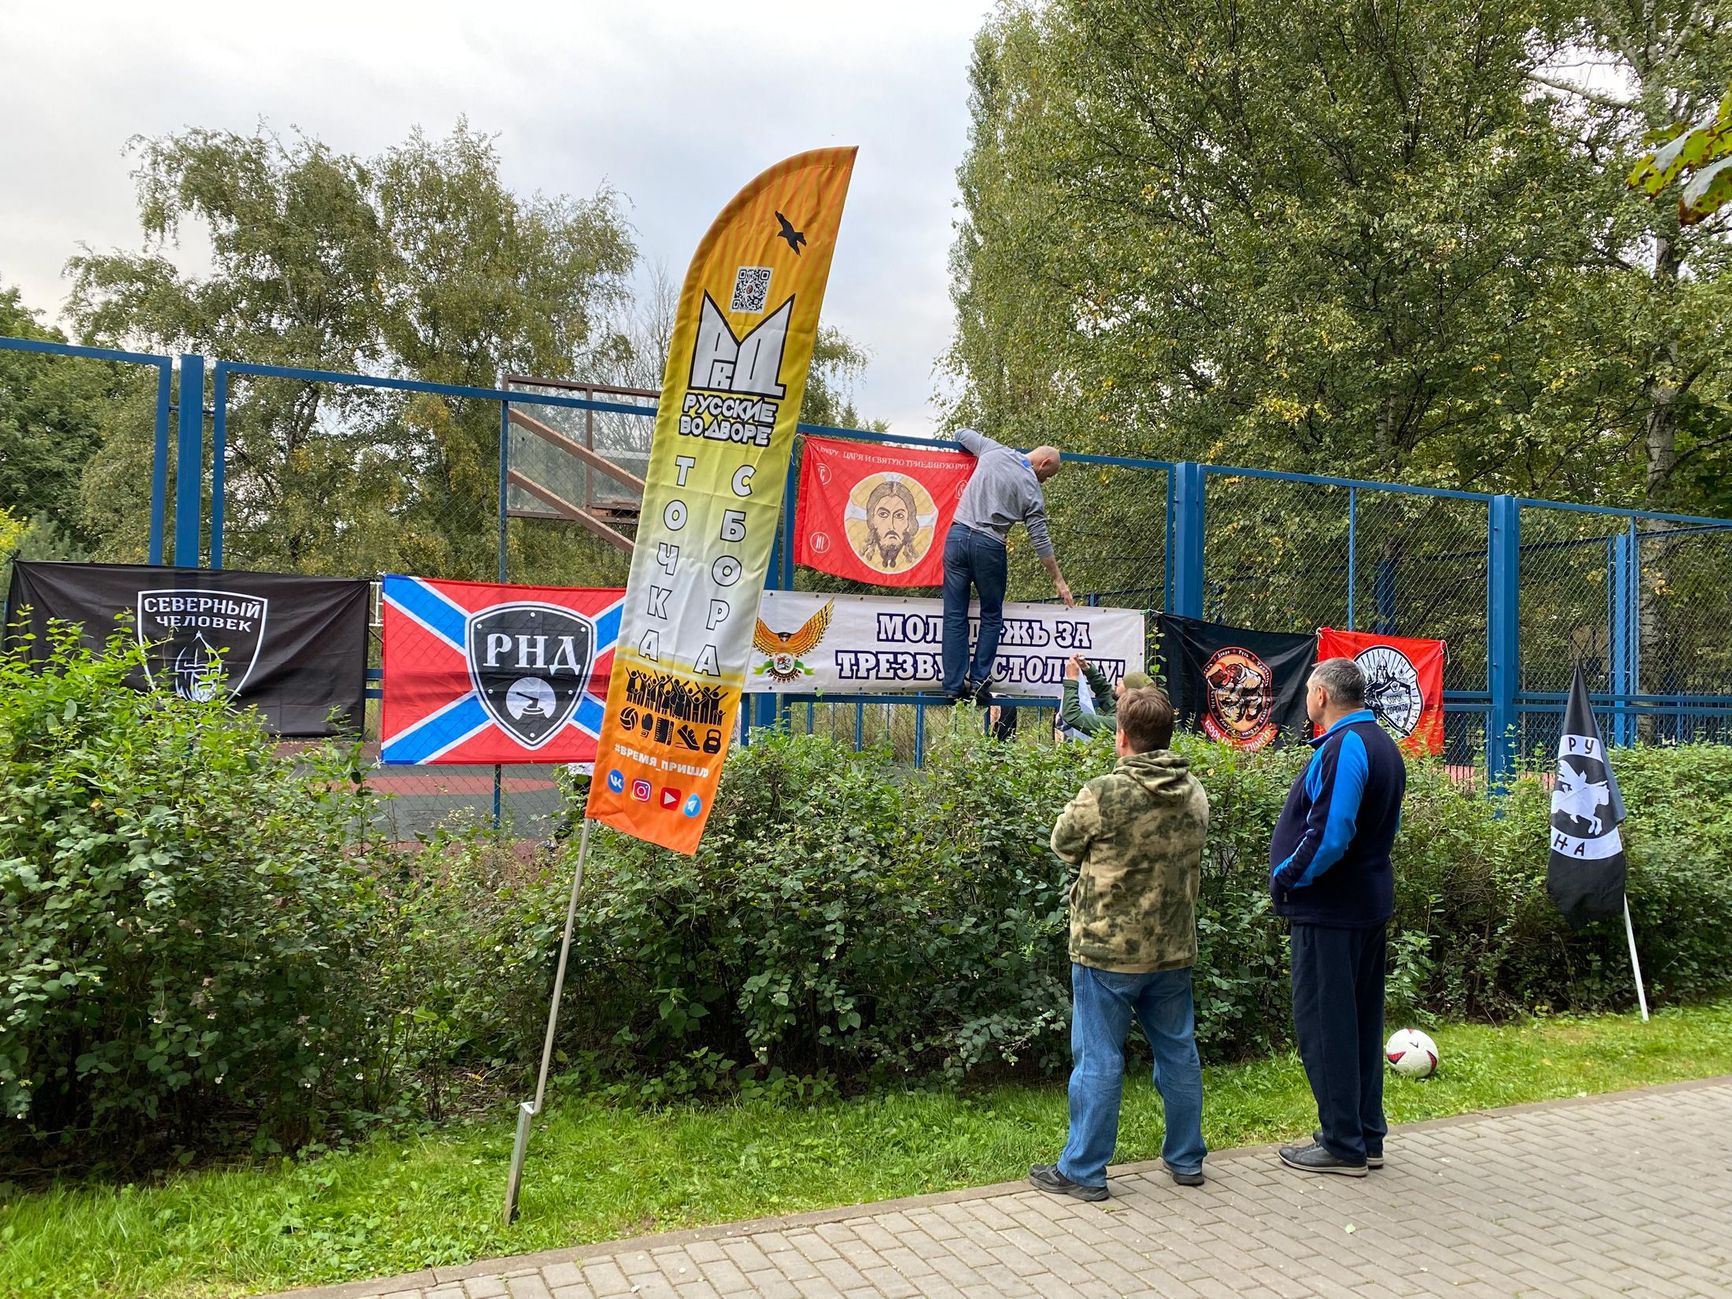 Nationalists hang flags with their symbols in Tushino Park in Moscow